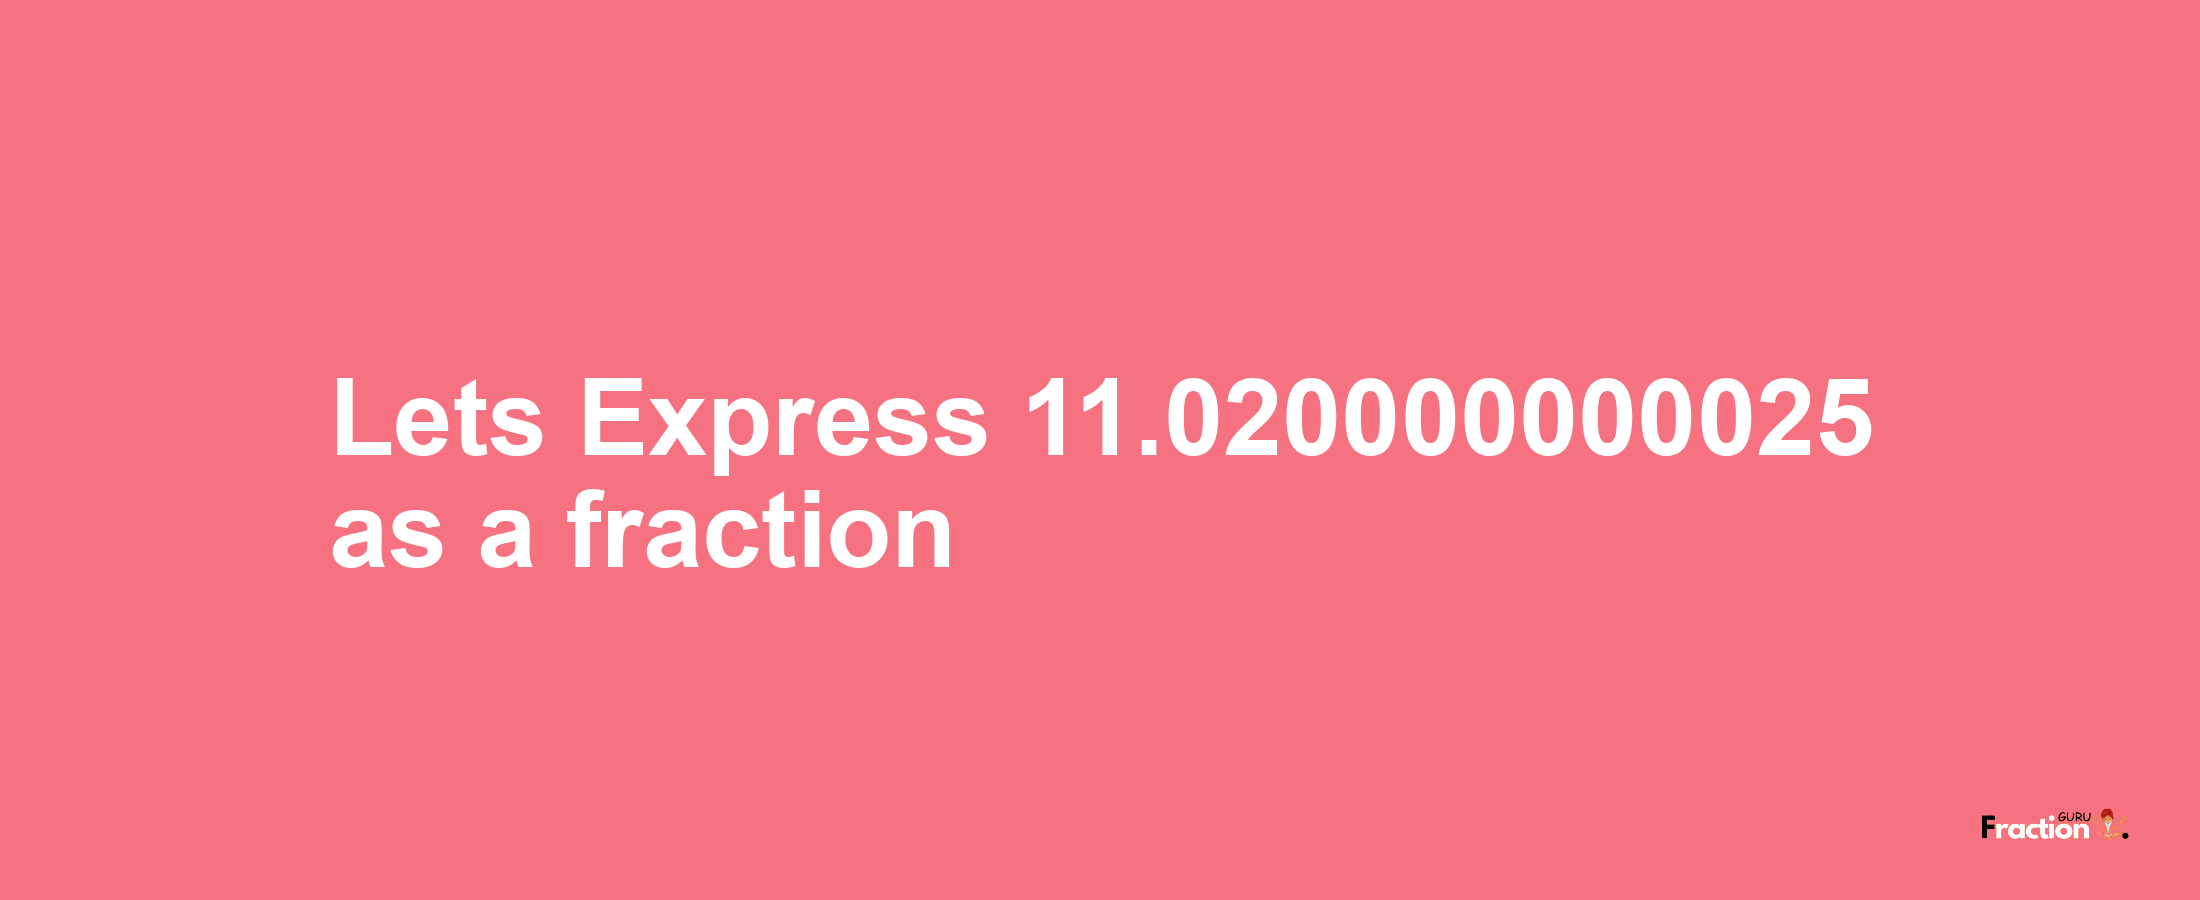 Lets Express 11.020000000025 as afraction